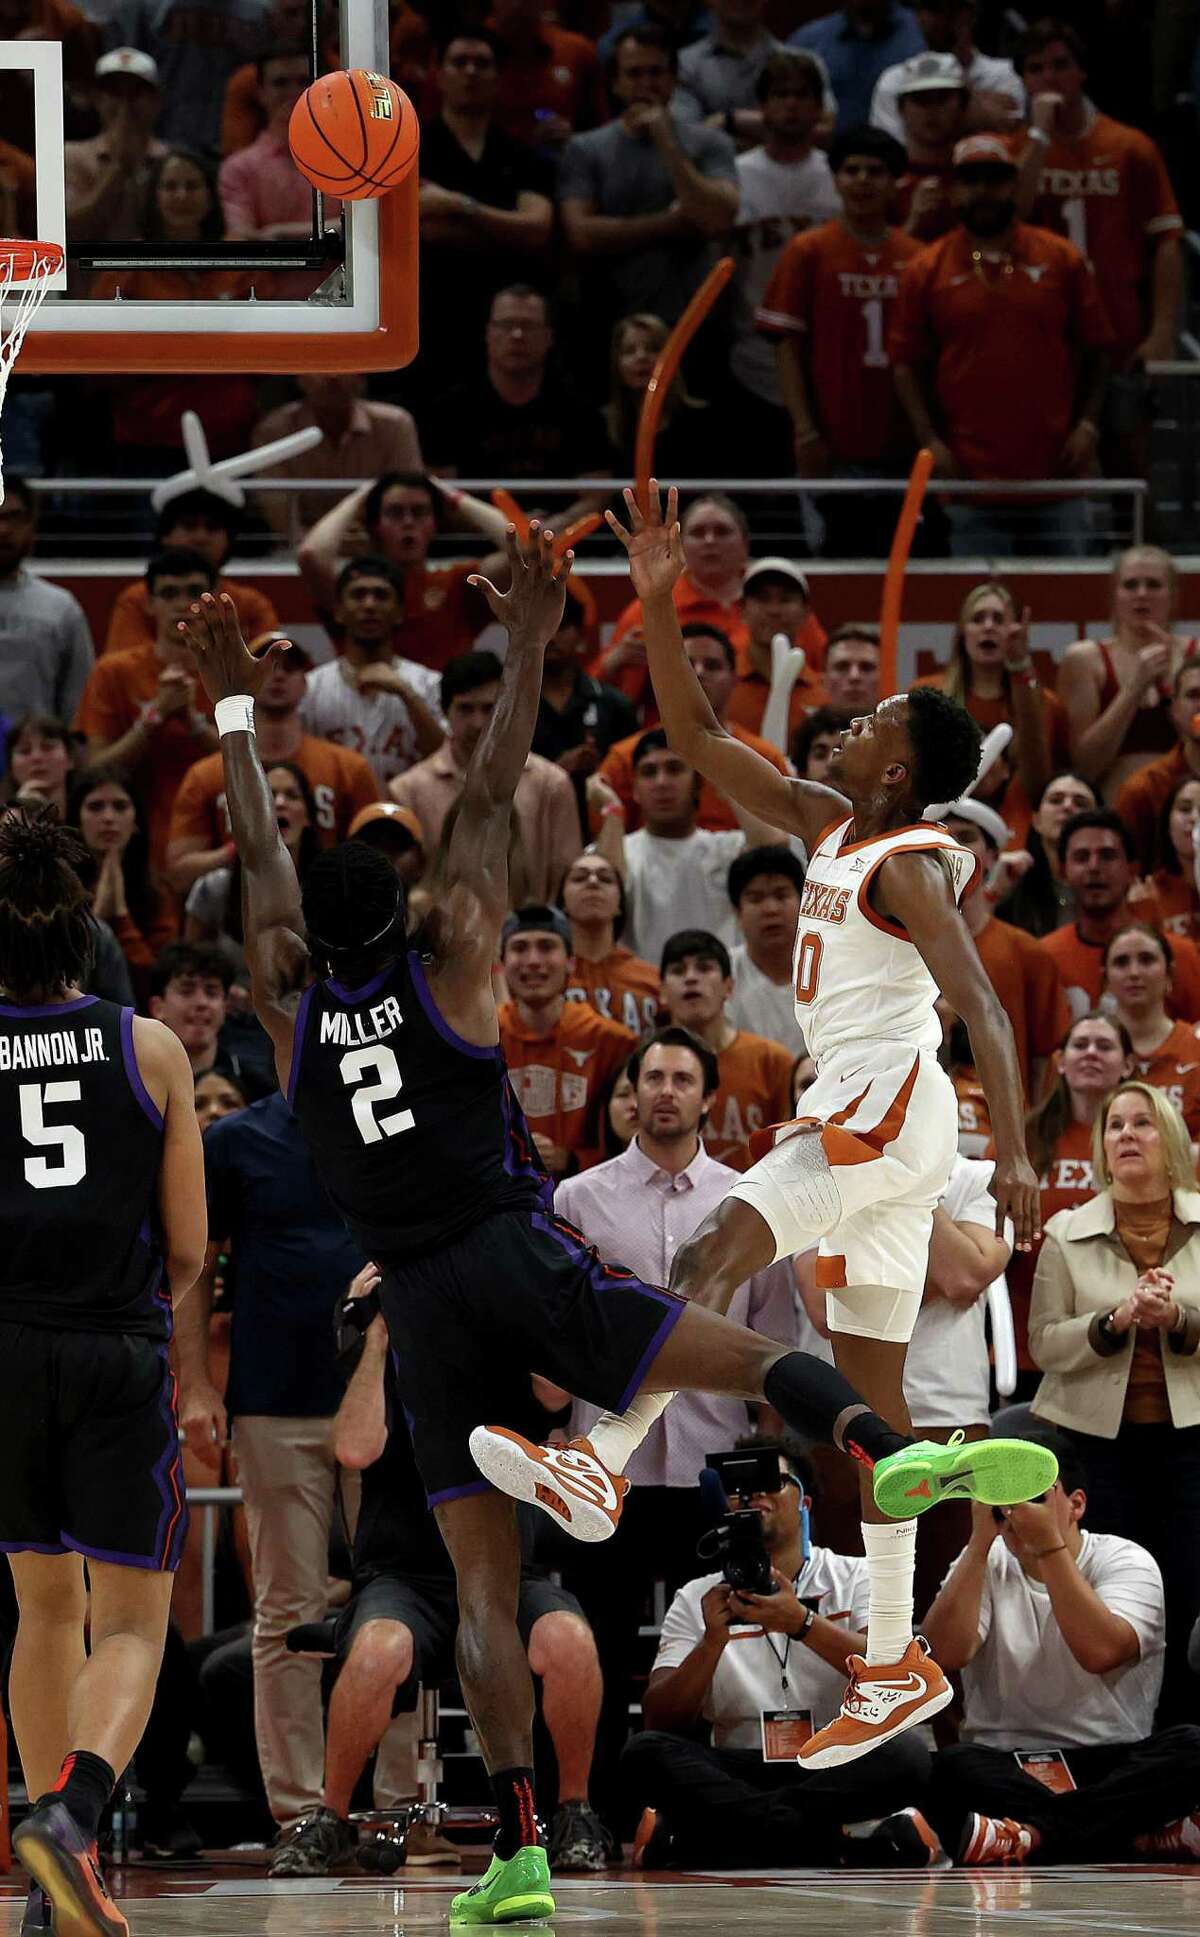 Texas’ Sir'Jabari Rice shoots over TCU’s Emanuel Miller during second half of Wednesday night’s game at Moody Center in Austin.